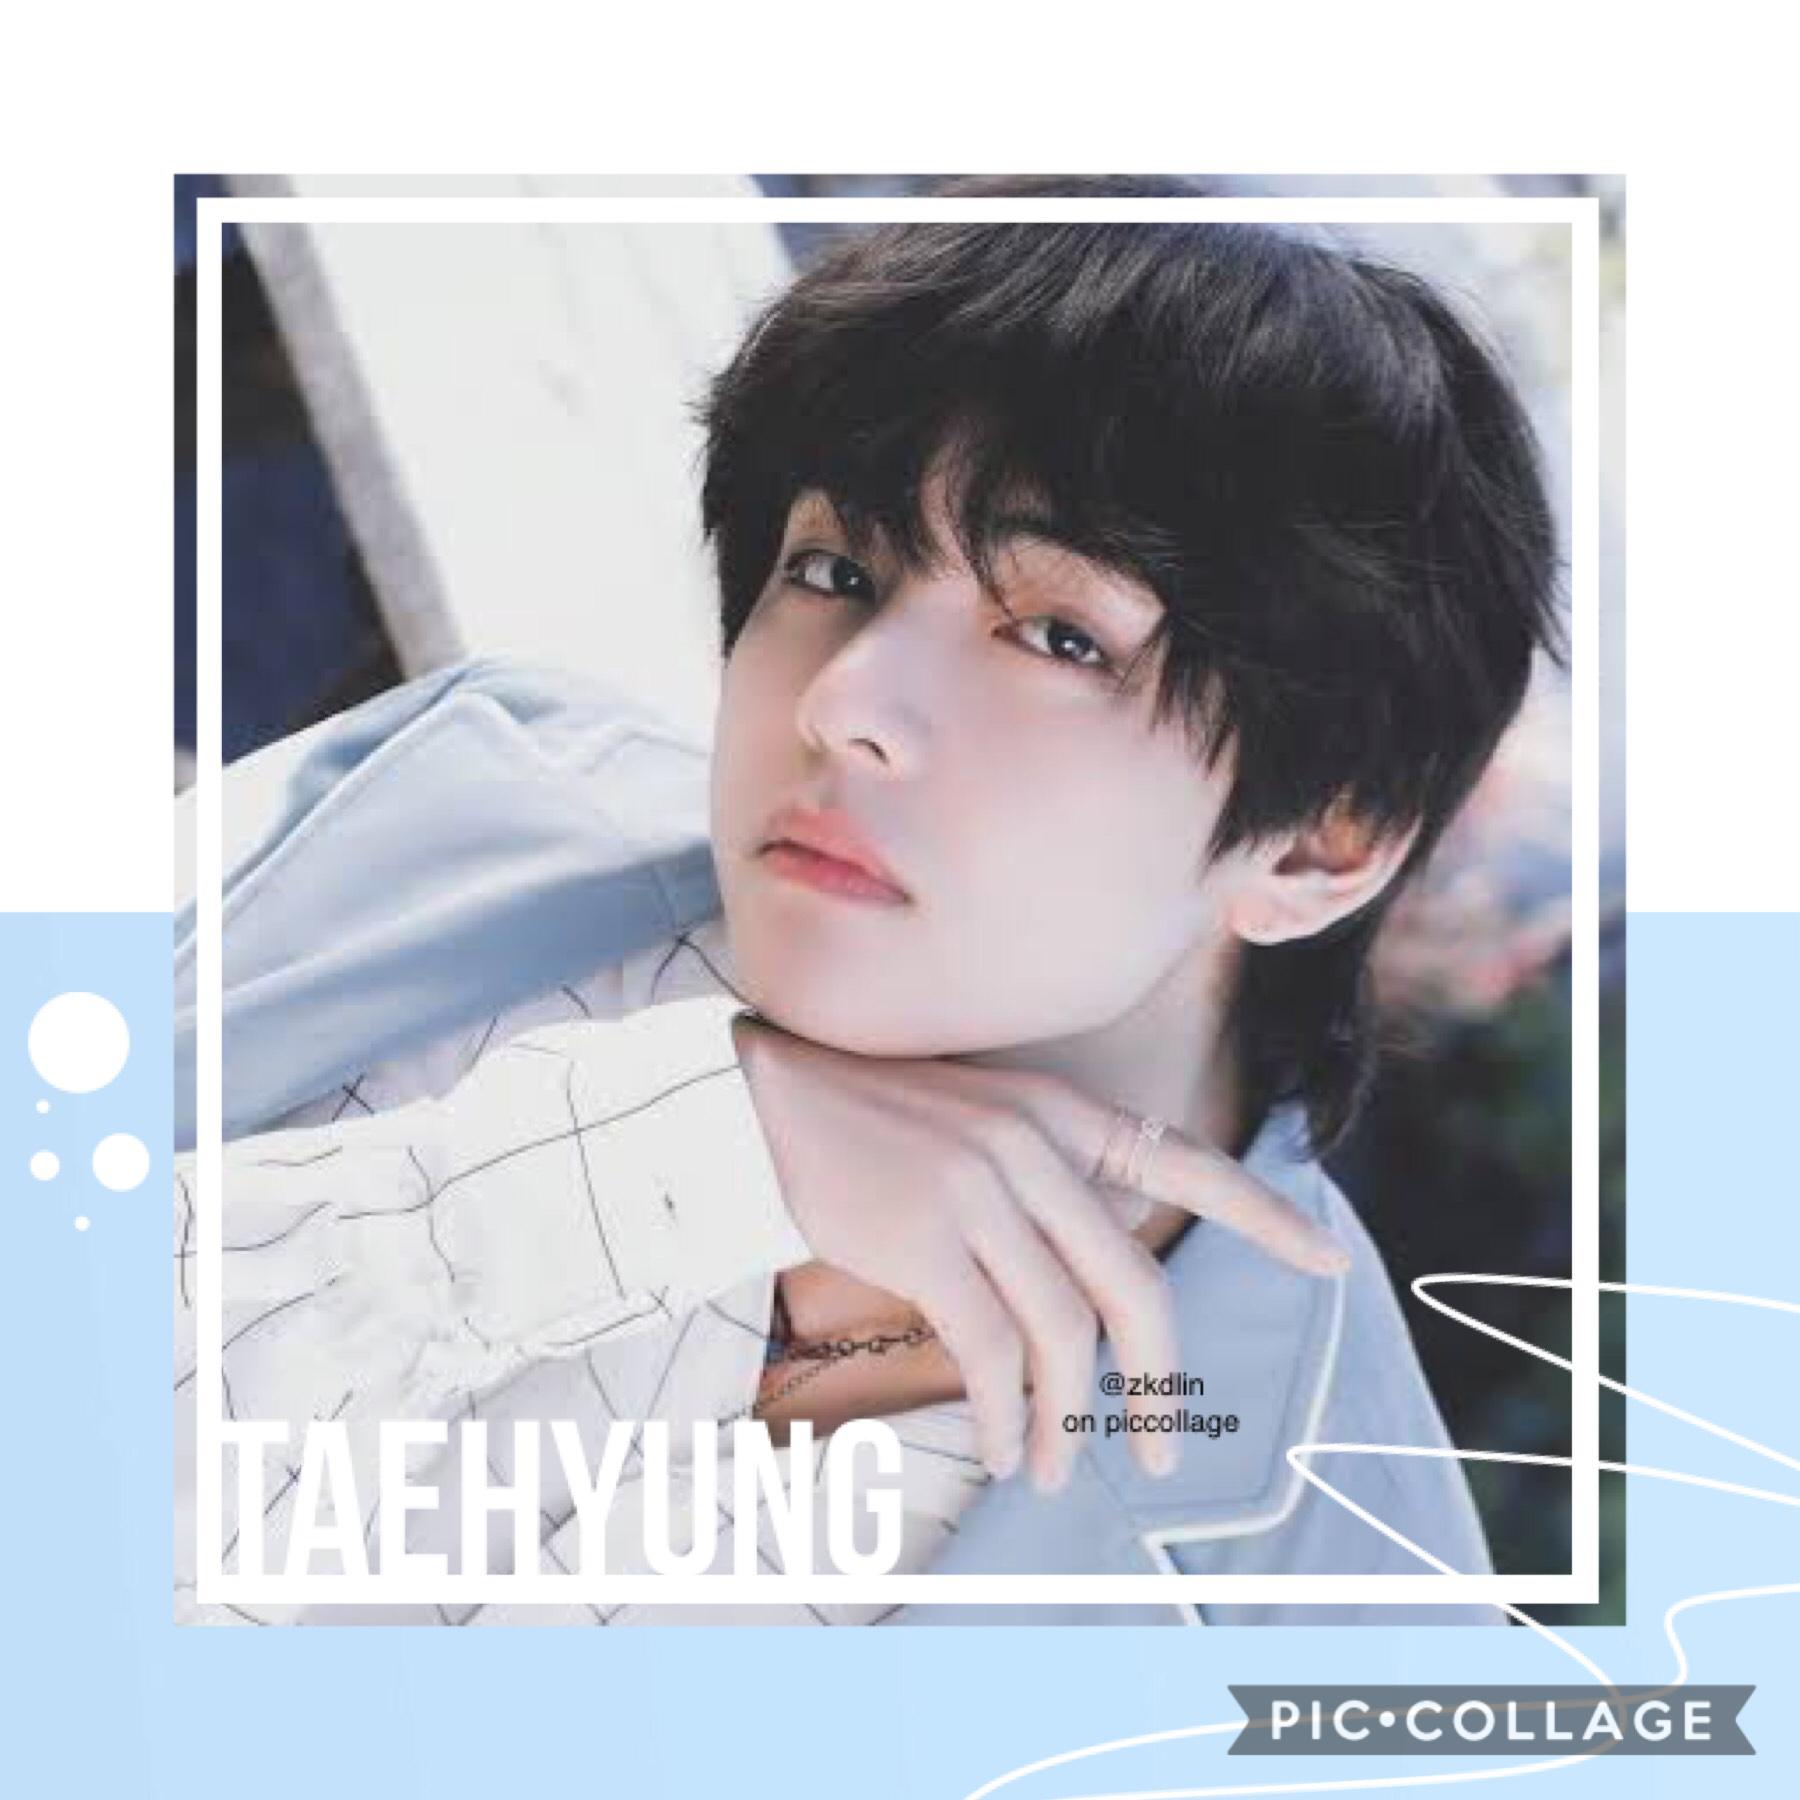 ☁️ｔａｅｈｙｕｎｇ (tap)
requested by @-magicshop

i have no inspo skskd
and piccollage deleted all my edits-
(not on my acc tho, on the “collages” thing)

:((